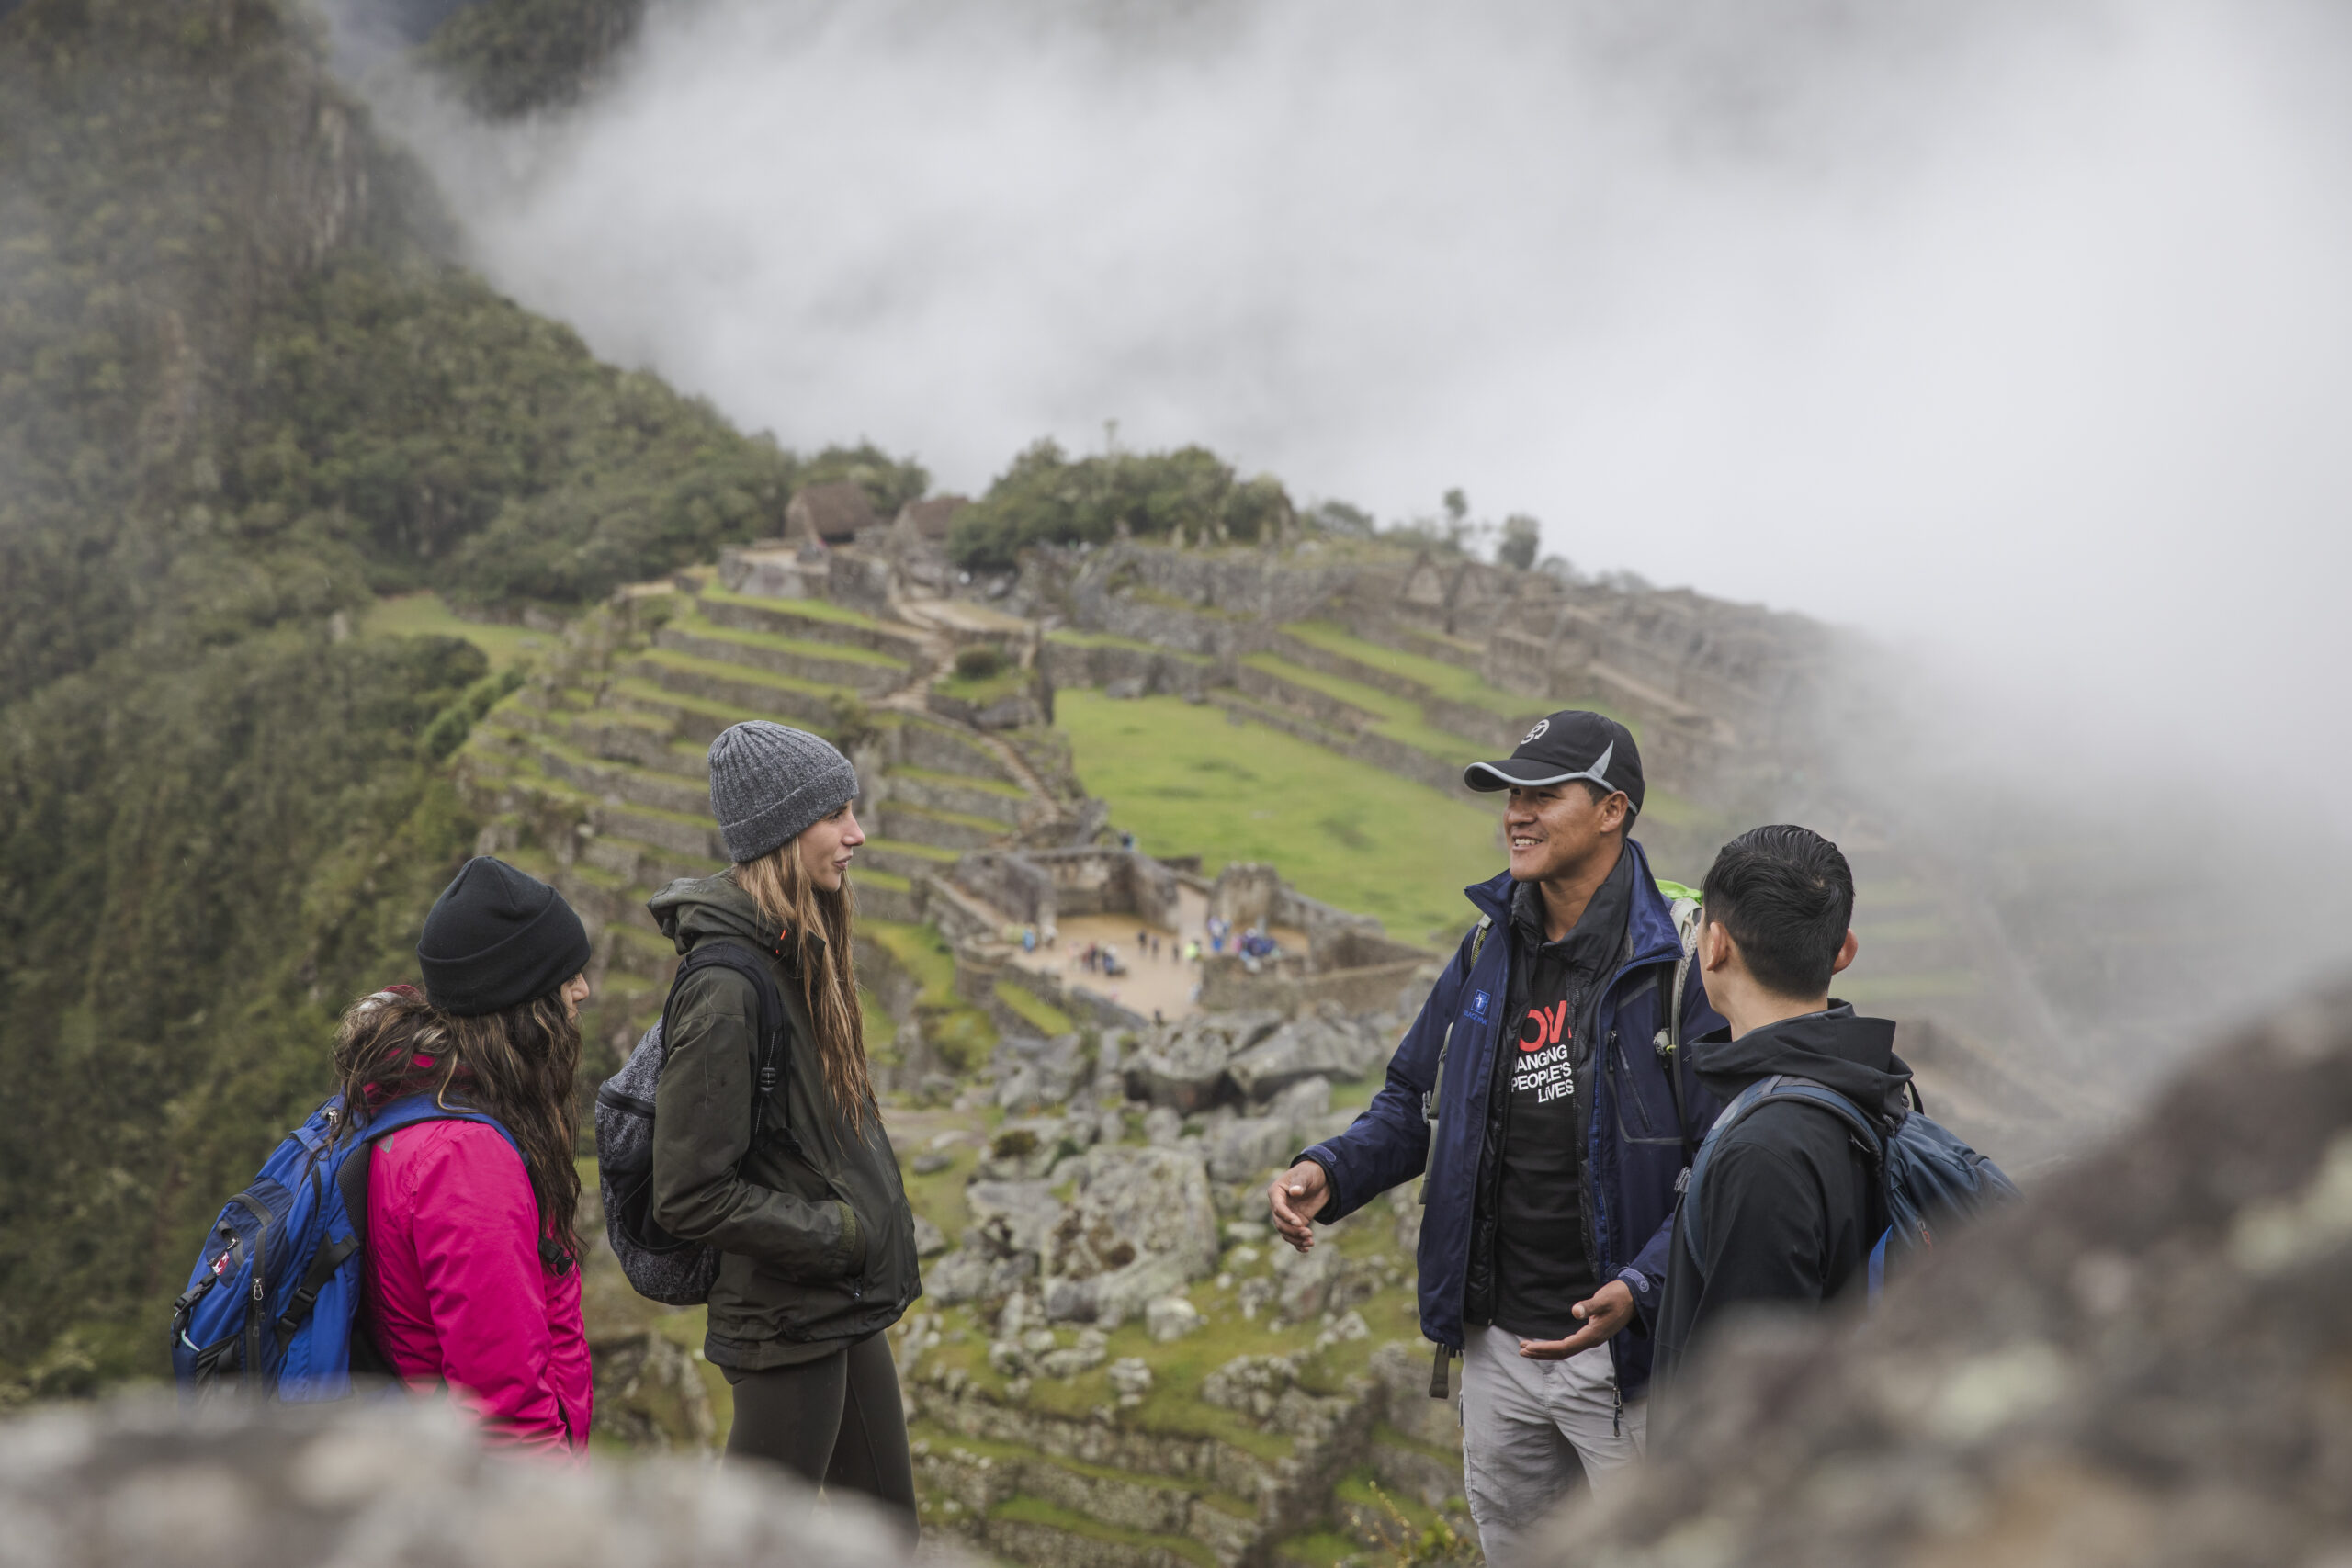 Inca Discovery trip in Peru, with a G Adventures CEO